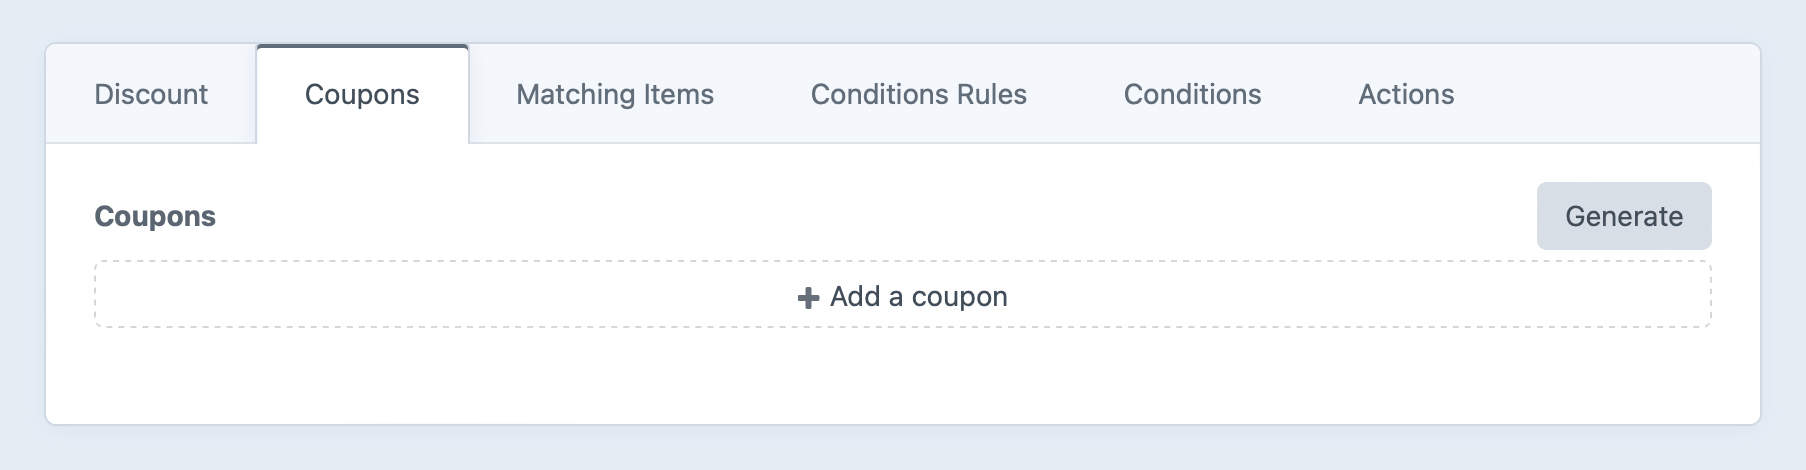 Screenshot of a new discount’s settings with its “Coupons” tab selected, displaying a “Generate” button and a separate “Add a coupon button”